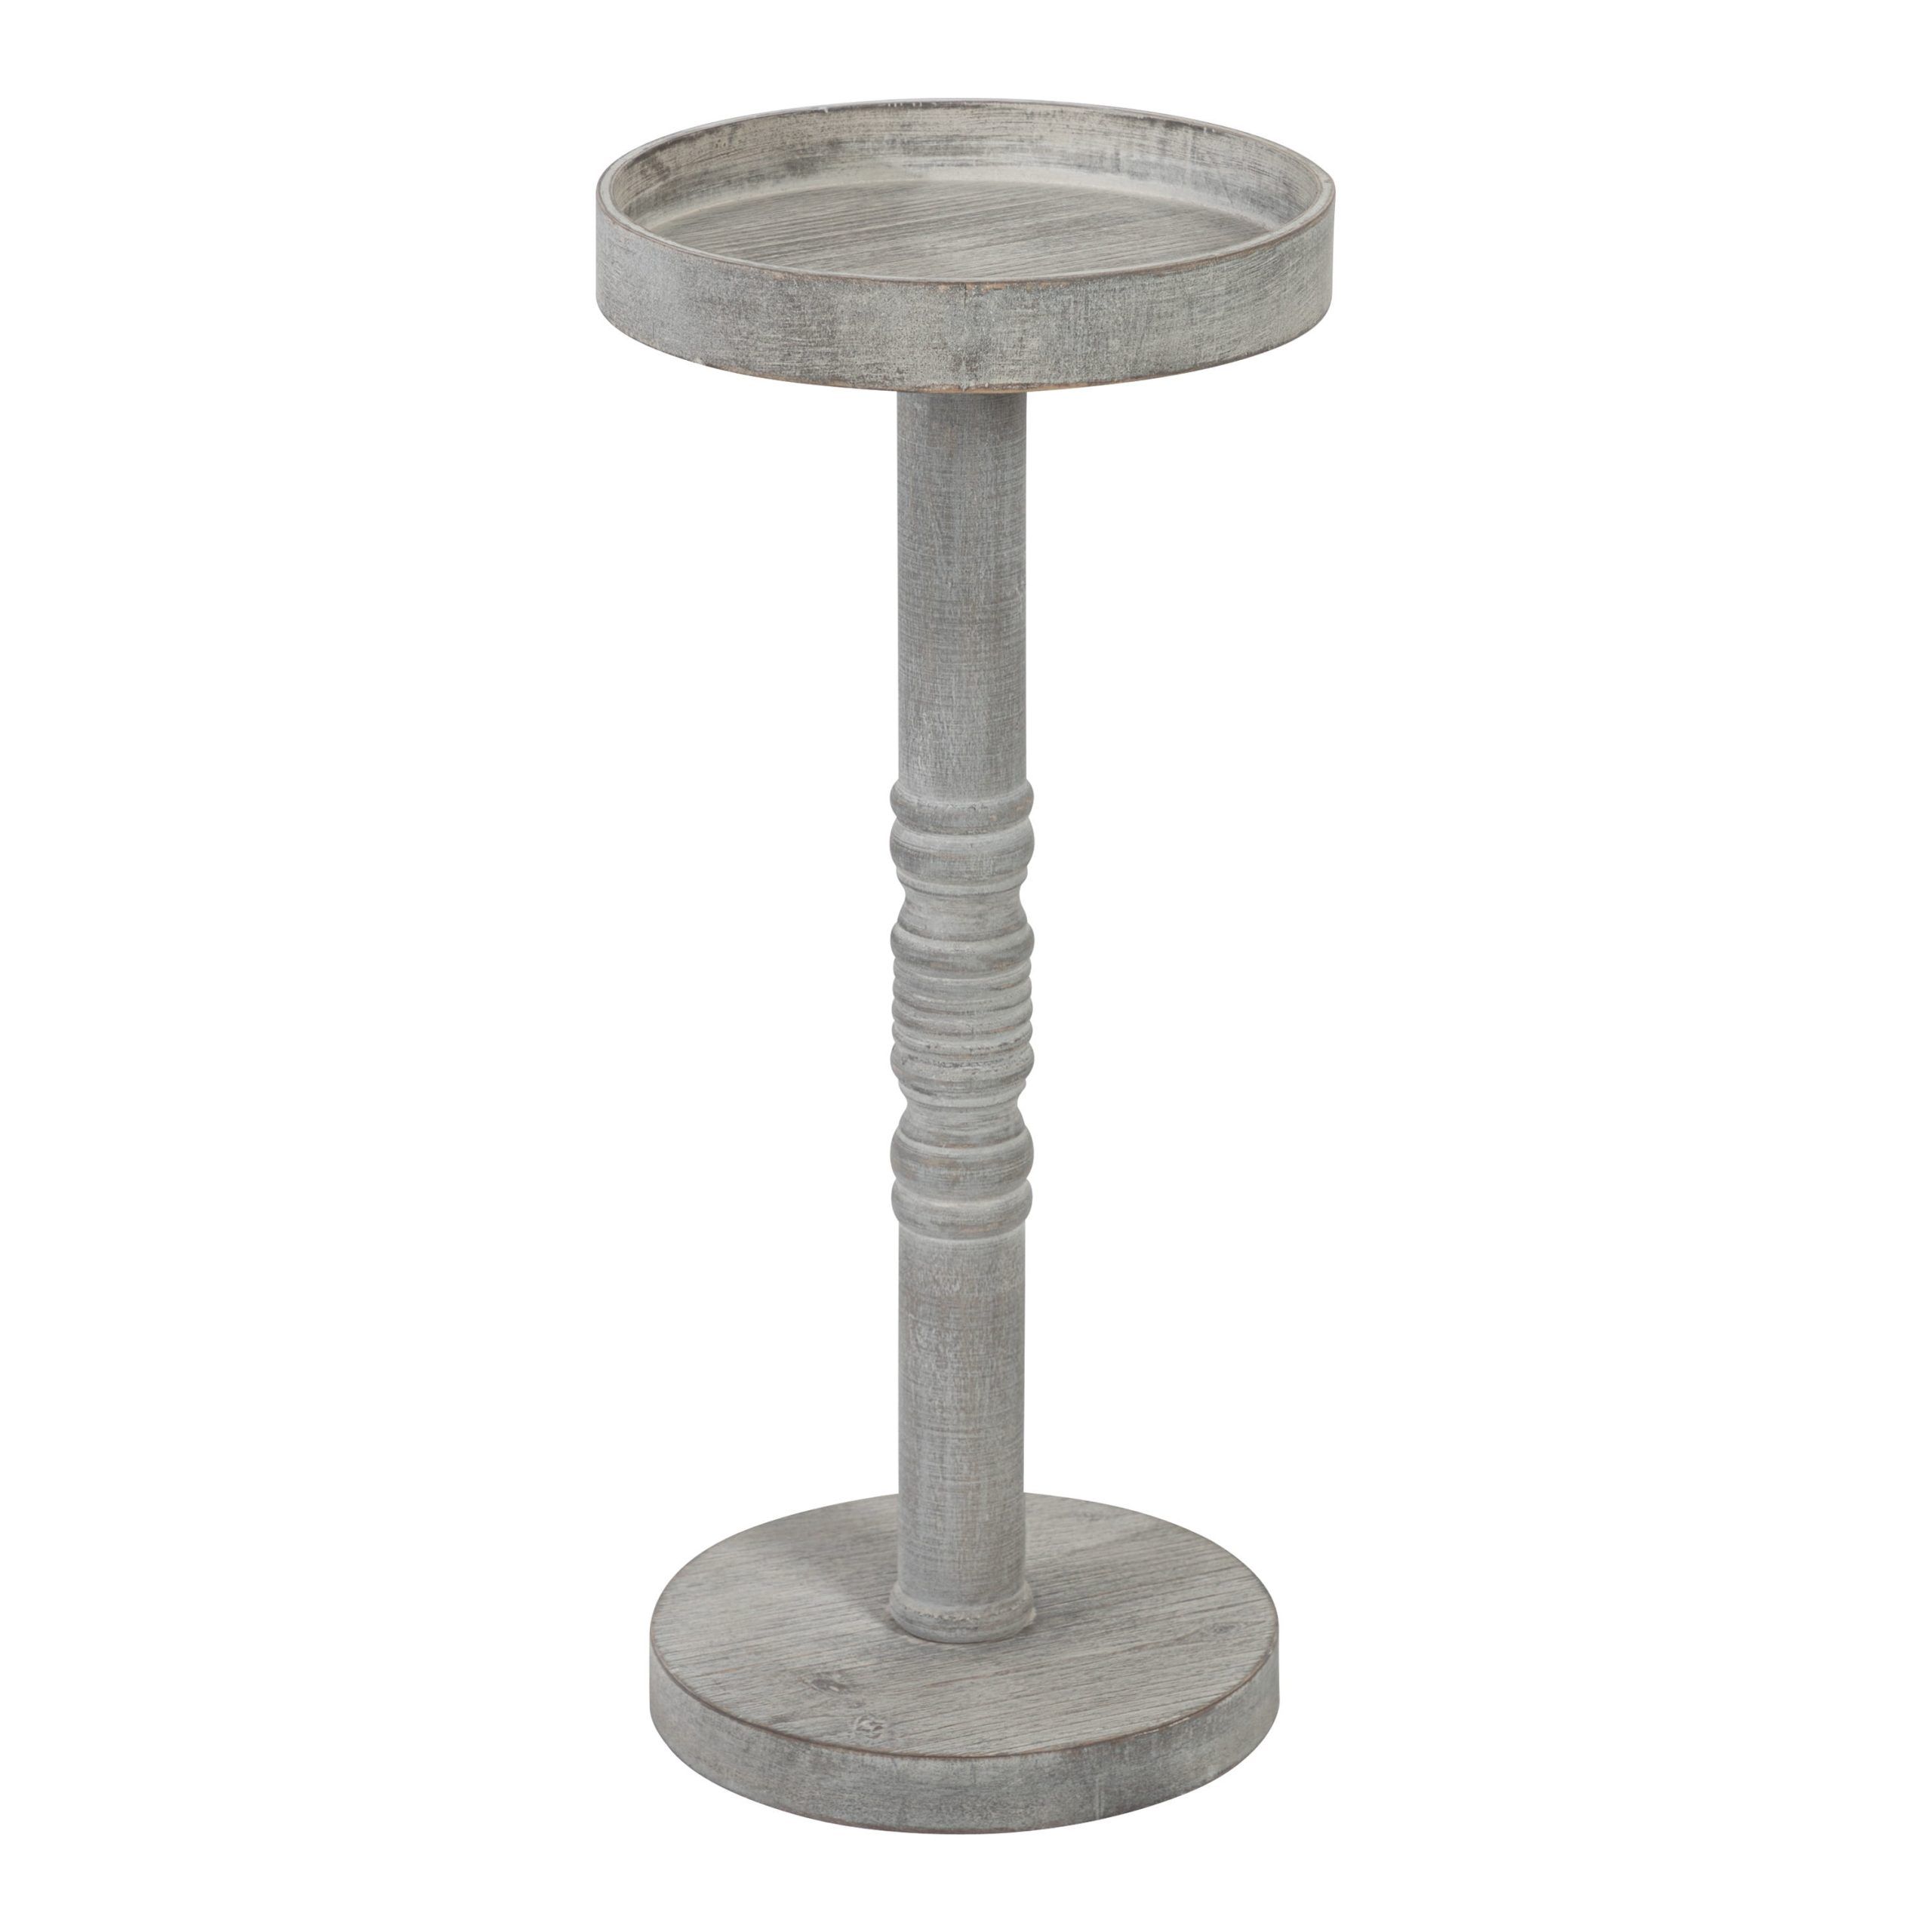 Kate And Laurel Bellport Farmhouse Drink Table, 10 X 10 X 22, Gray,  Decorative Coastal Cocktail Table With Round Tabletop And Colonial Base For  Farmhouse Decor – Walmart Pertaining To Gray Coastal Cocktail Tables (View 9 of 15)